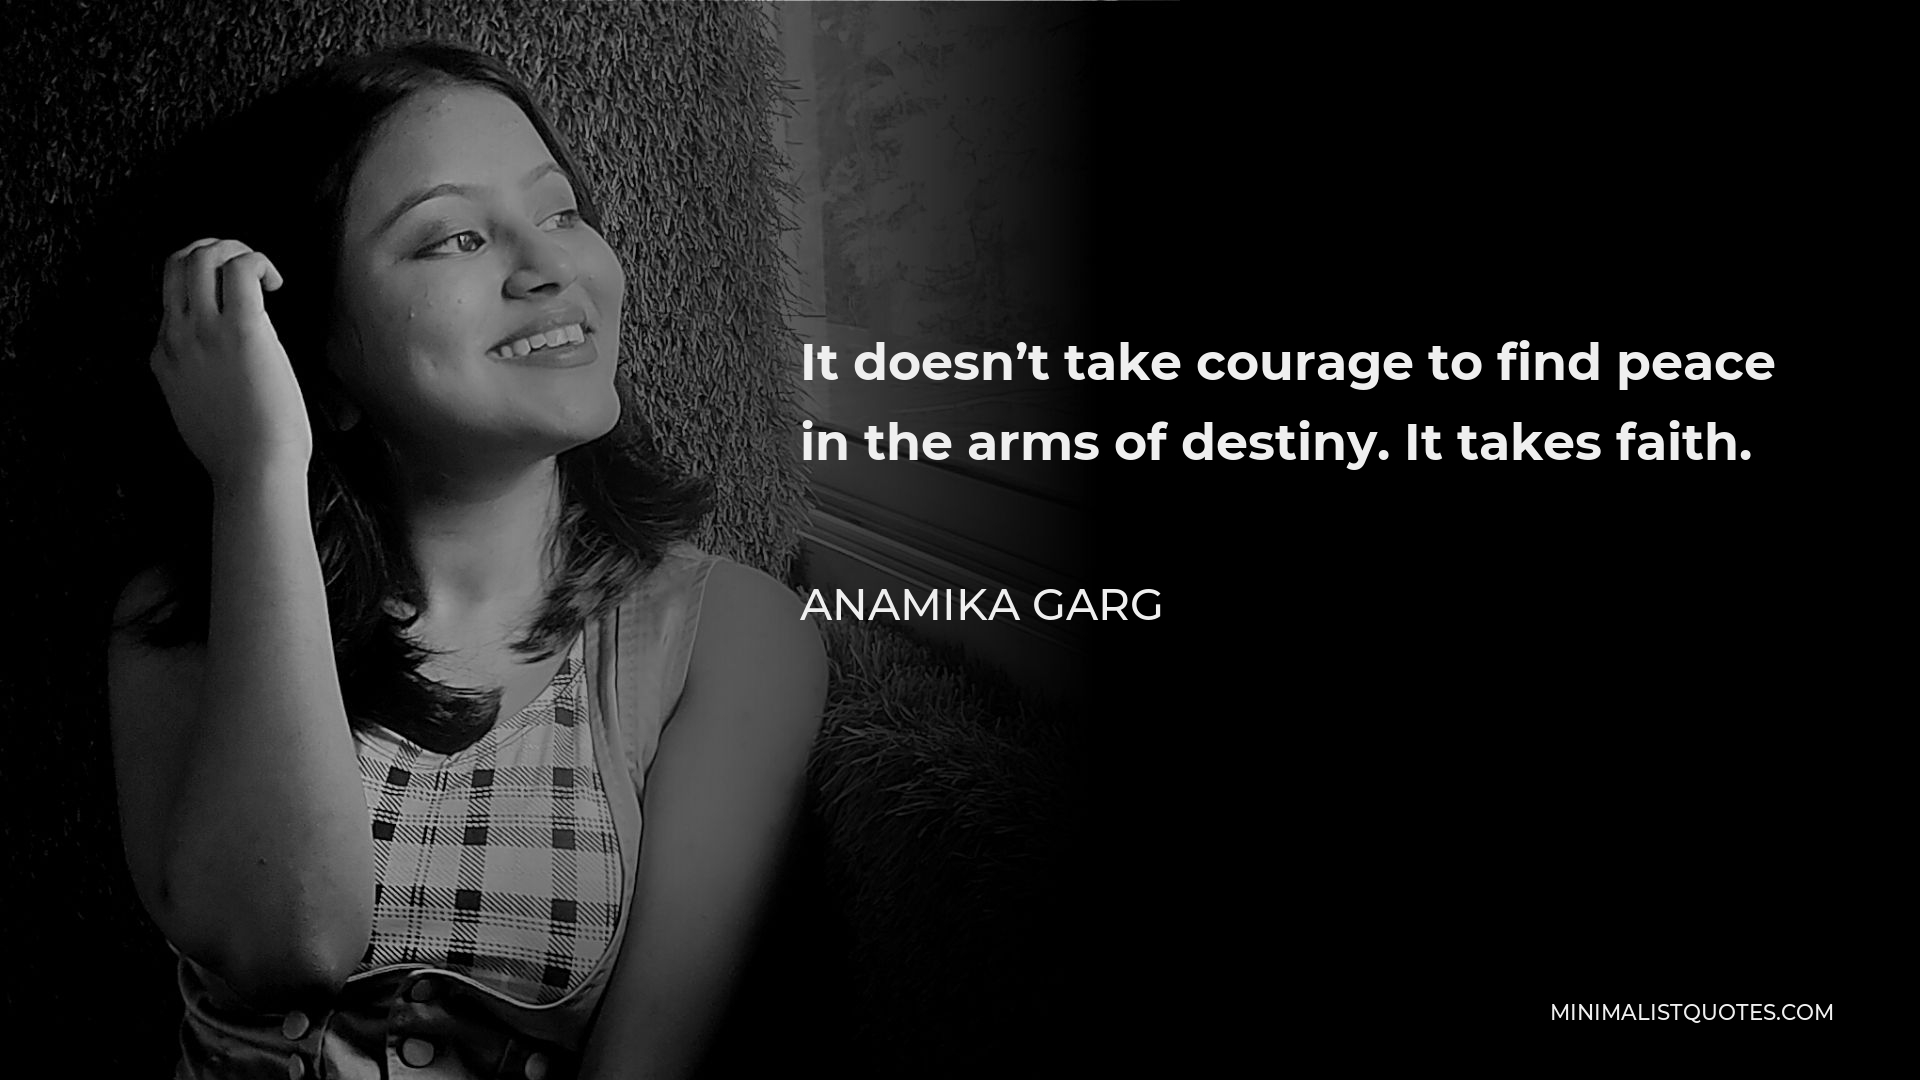 Anamika Garg Quote - It doesn’t take courage to find peace in the arms of destiny. It takes faith.